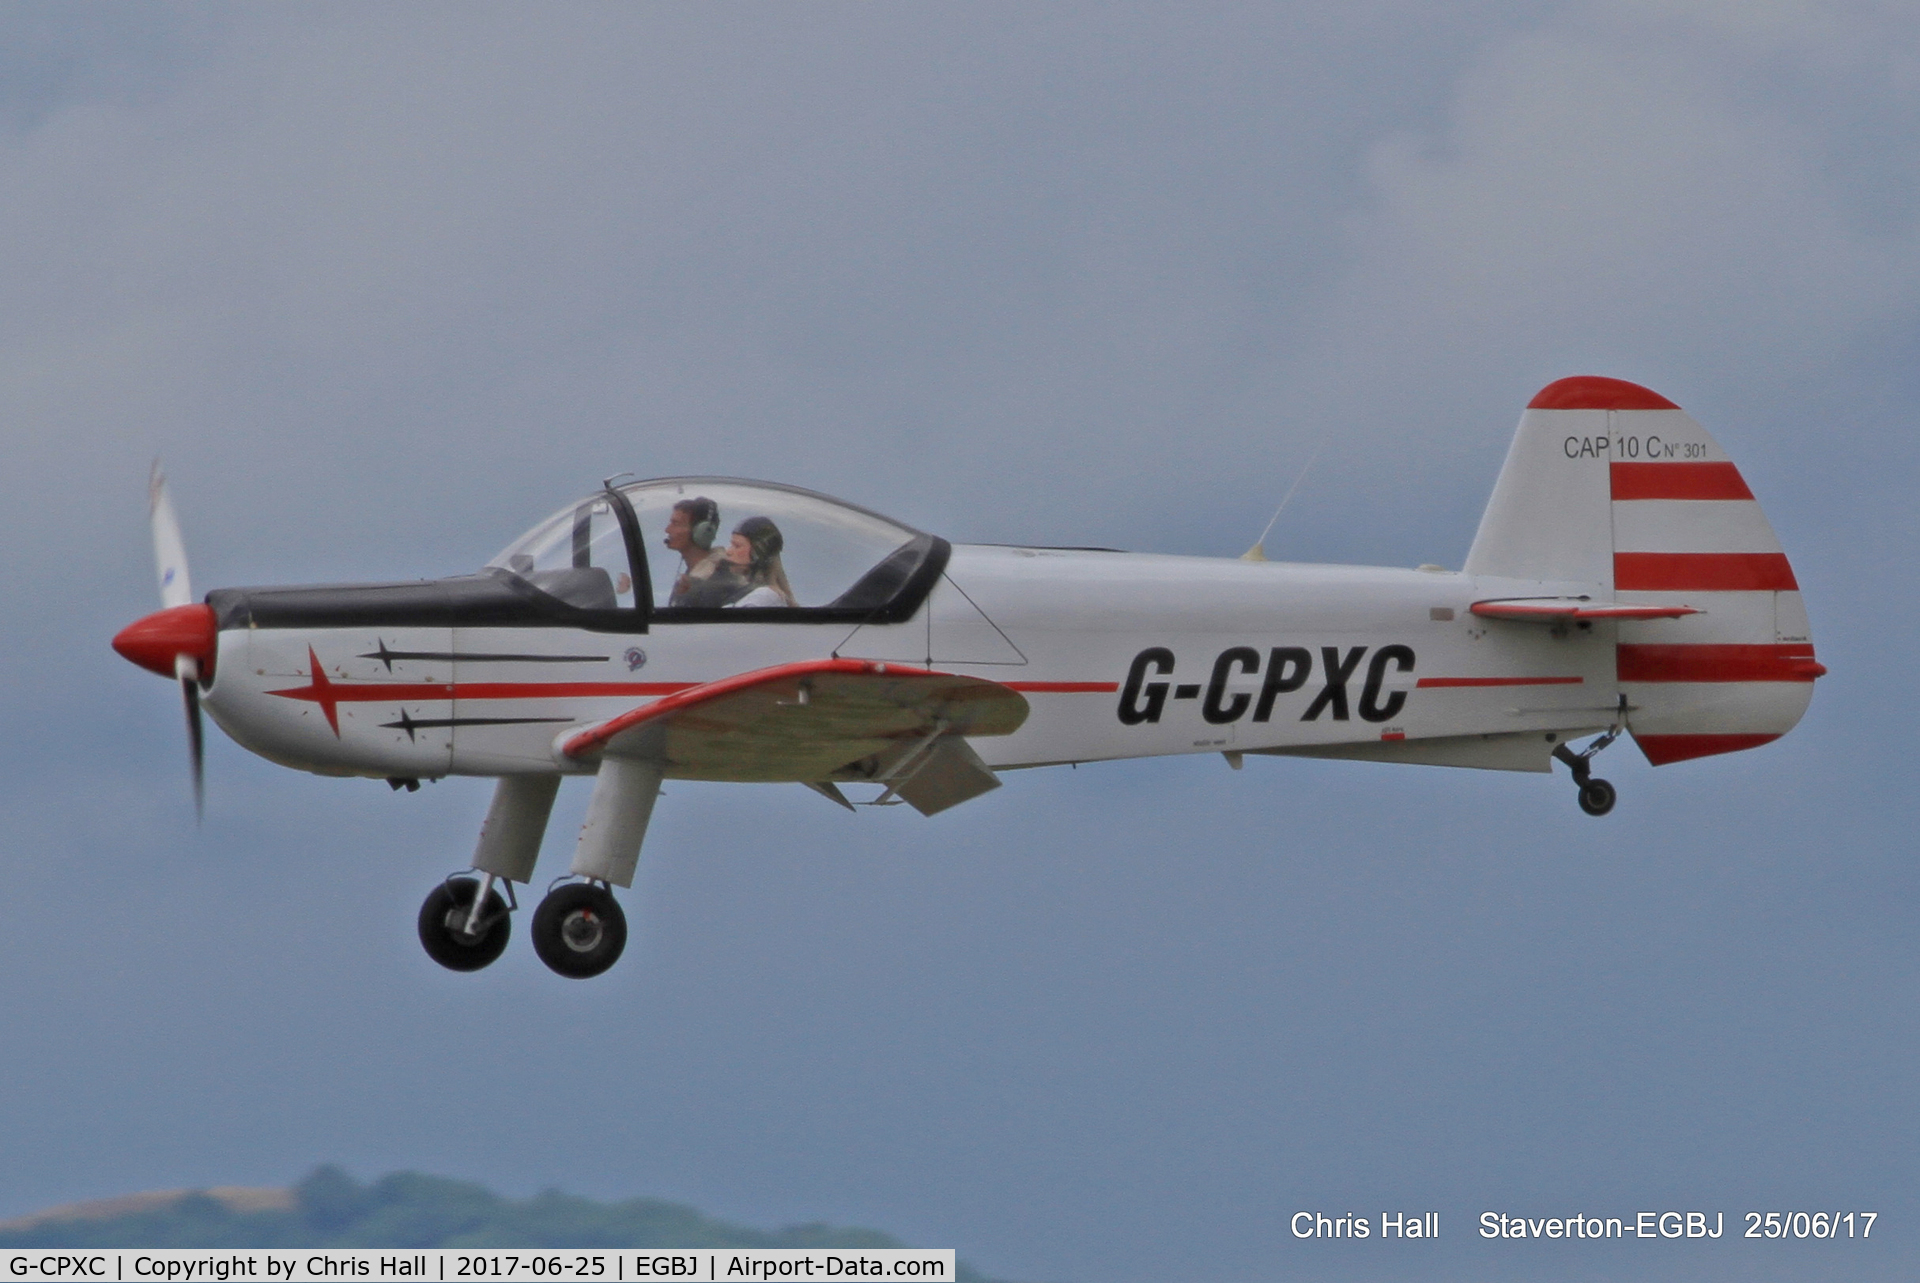 G-CPXC, 2002 Mudry CAP-10B C/N 301, Project Propeller at Staverton